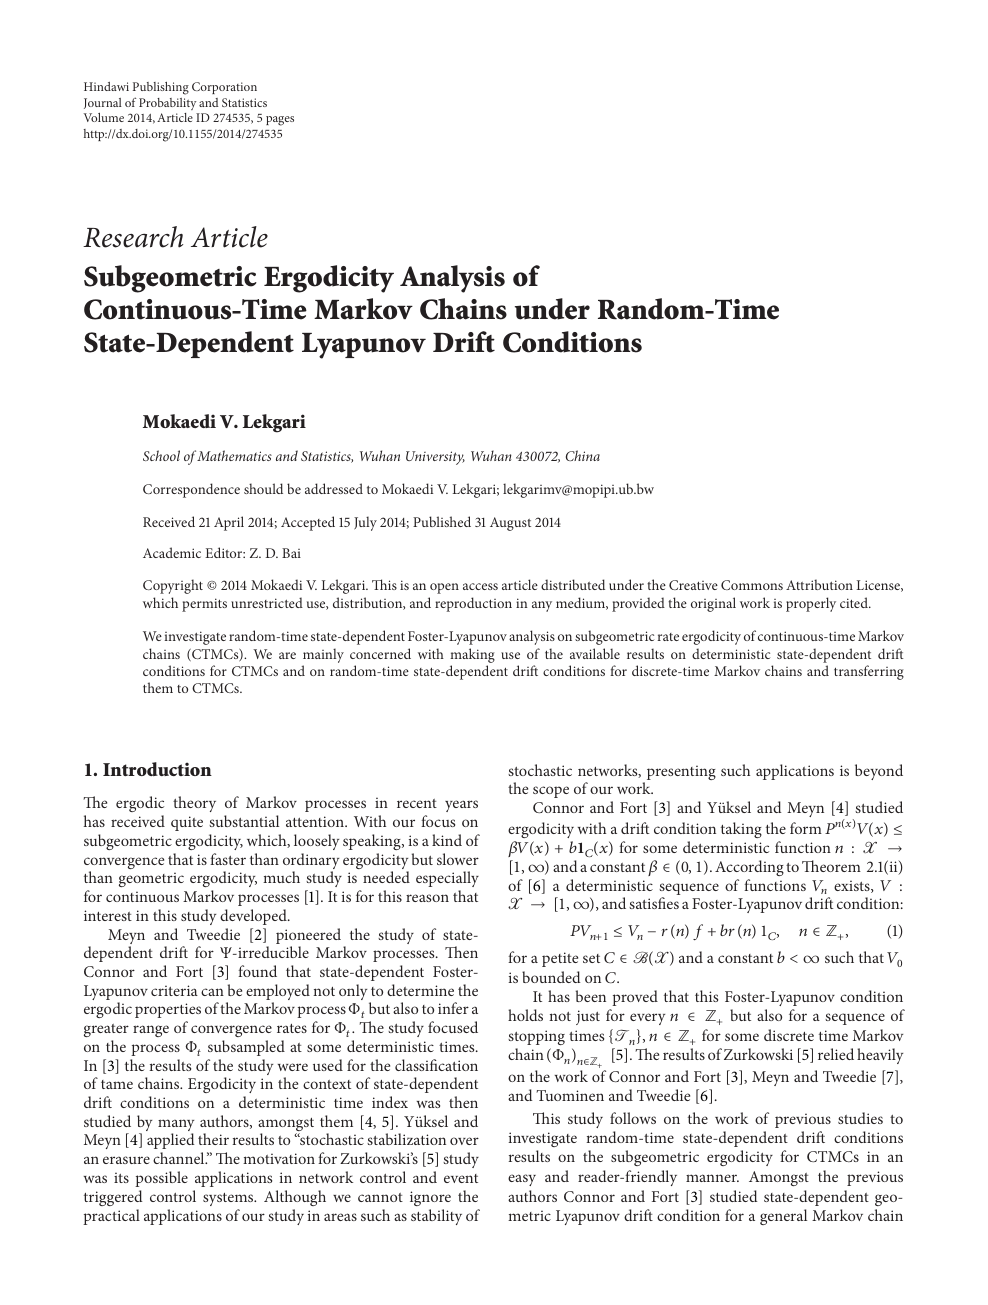 Subgeometric Ergodicity Analysis Of Continuous Time Markov Chains Under Random Time State Dependent Lyapunov Drift Conditions Topic Of Research Paper In Mathematics Download Scholarly Article Pdf And Read For Free On Cyberleninka Open Science